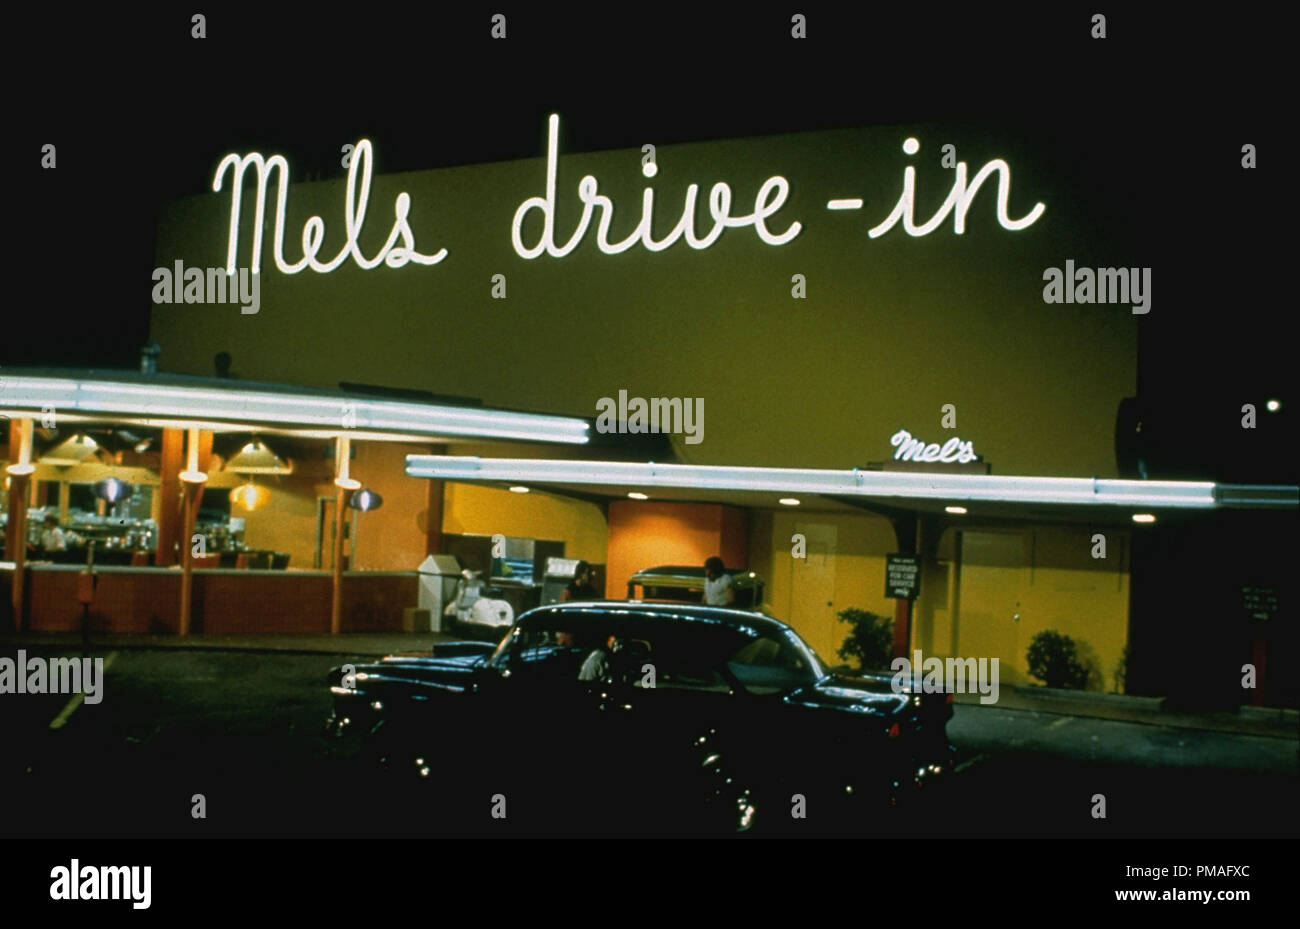 Studio released publicity film still from 'American Graffiti' Mel's Drive-in,  1973 Universal Pictures   File Reference # 32633 841THA Stock Photo